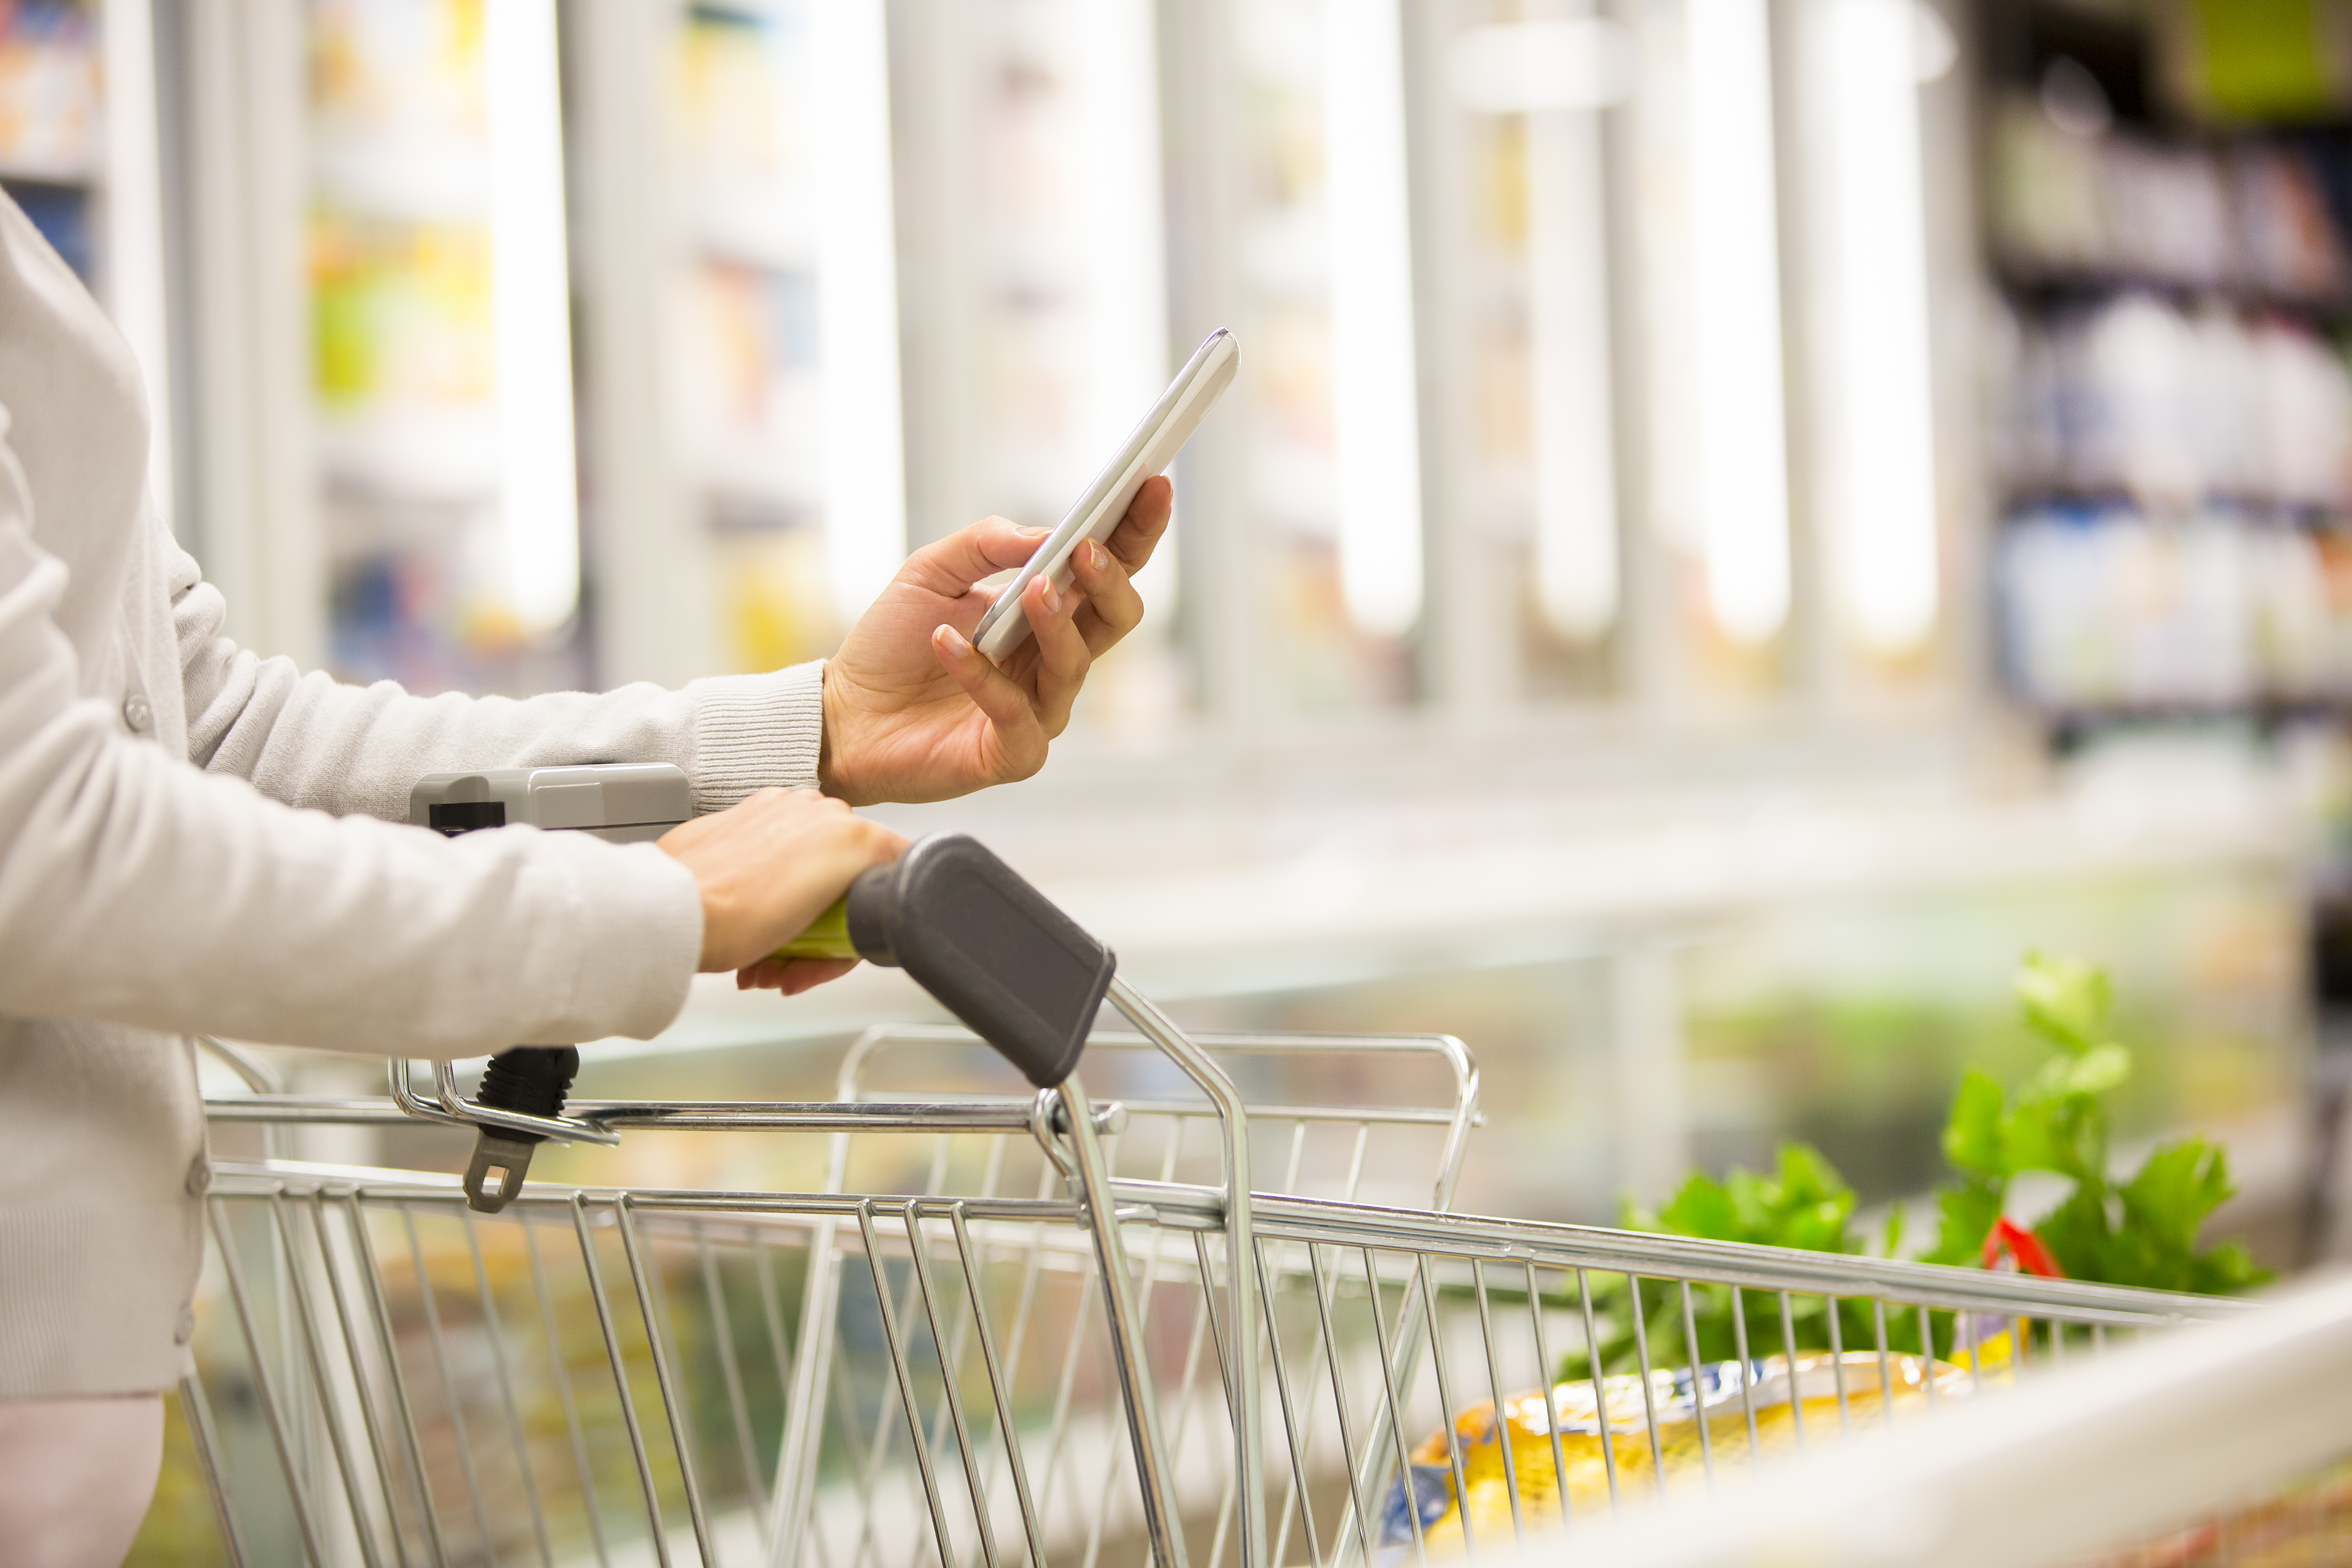 digital solutions for grocery and pharmacy retail customers